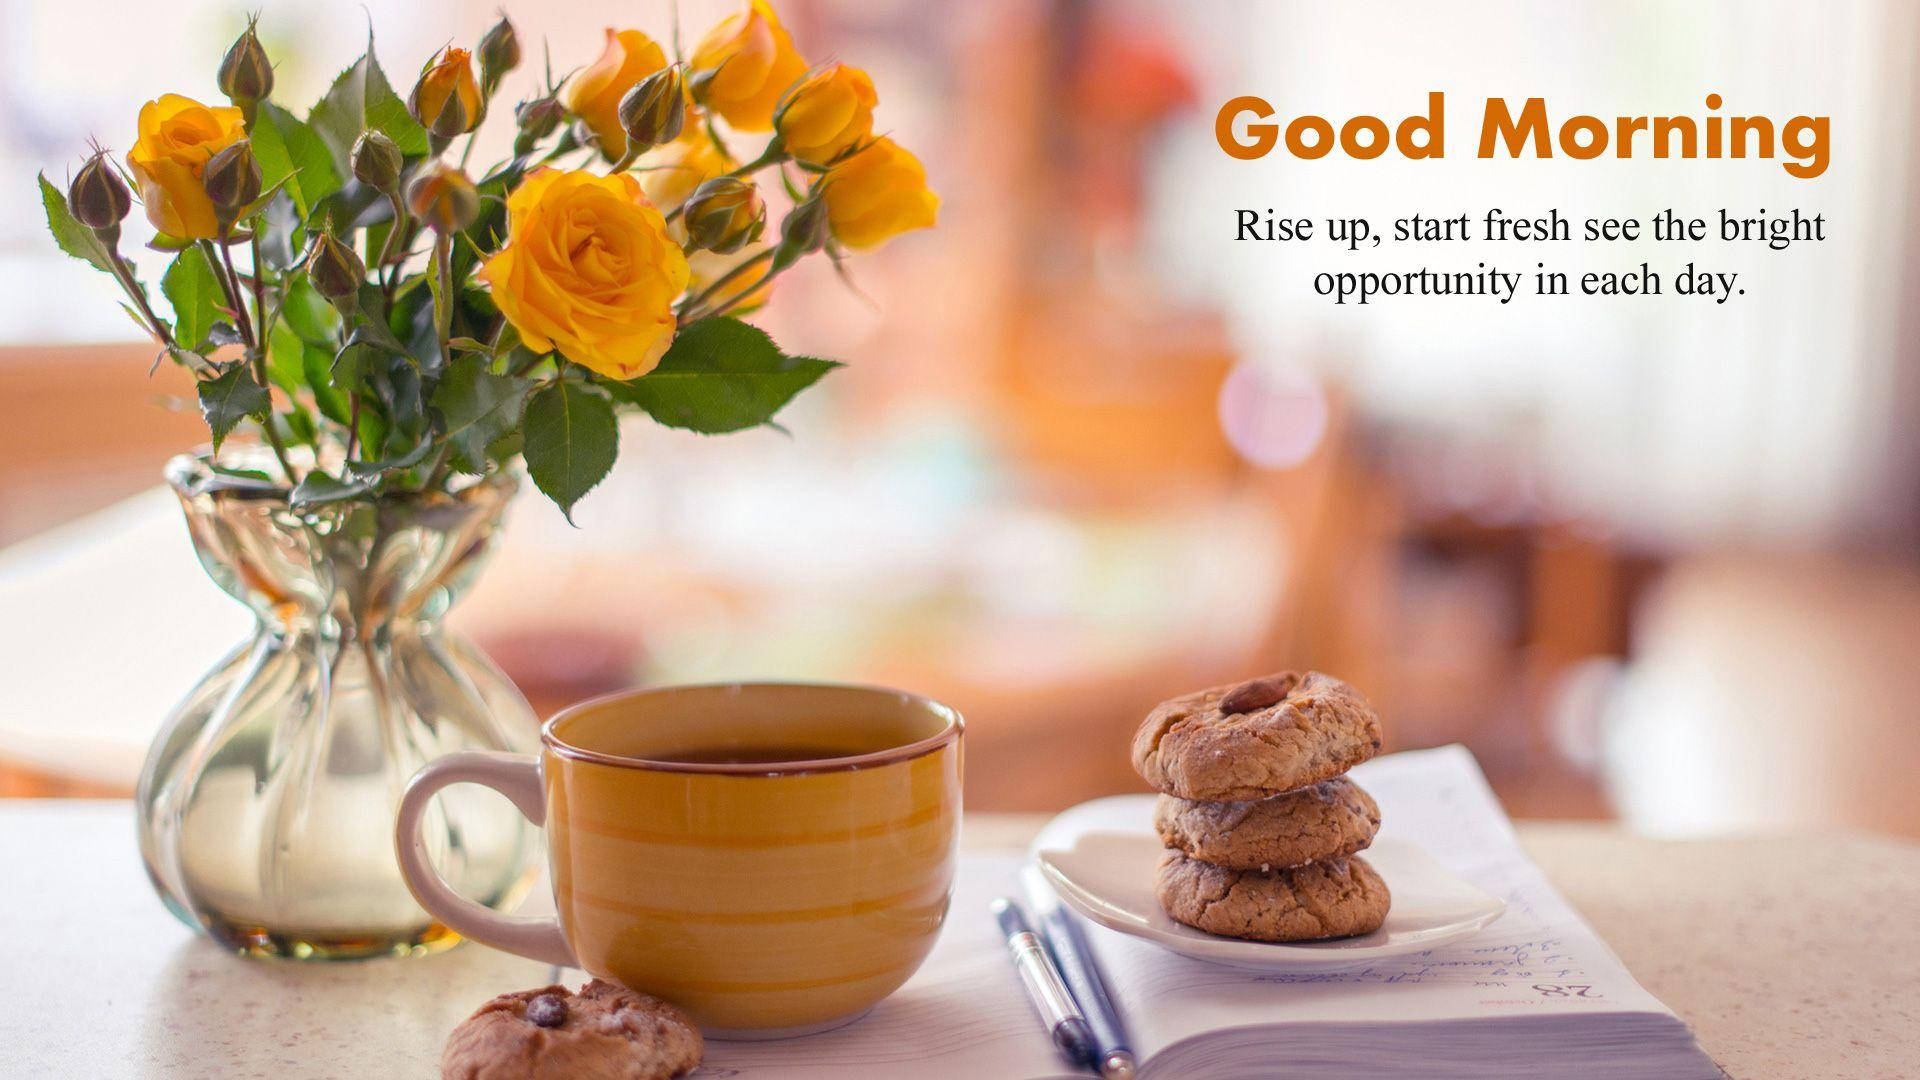 Good Morning HD Flowers And Biscuits Wallpaper